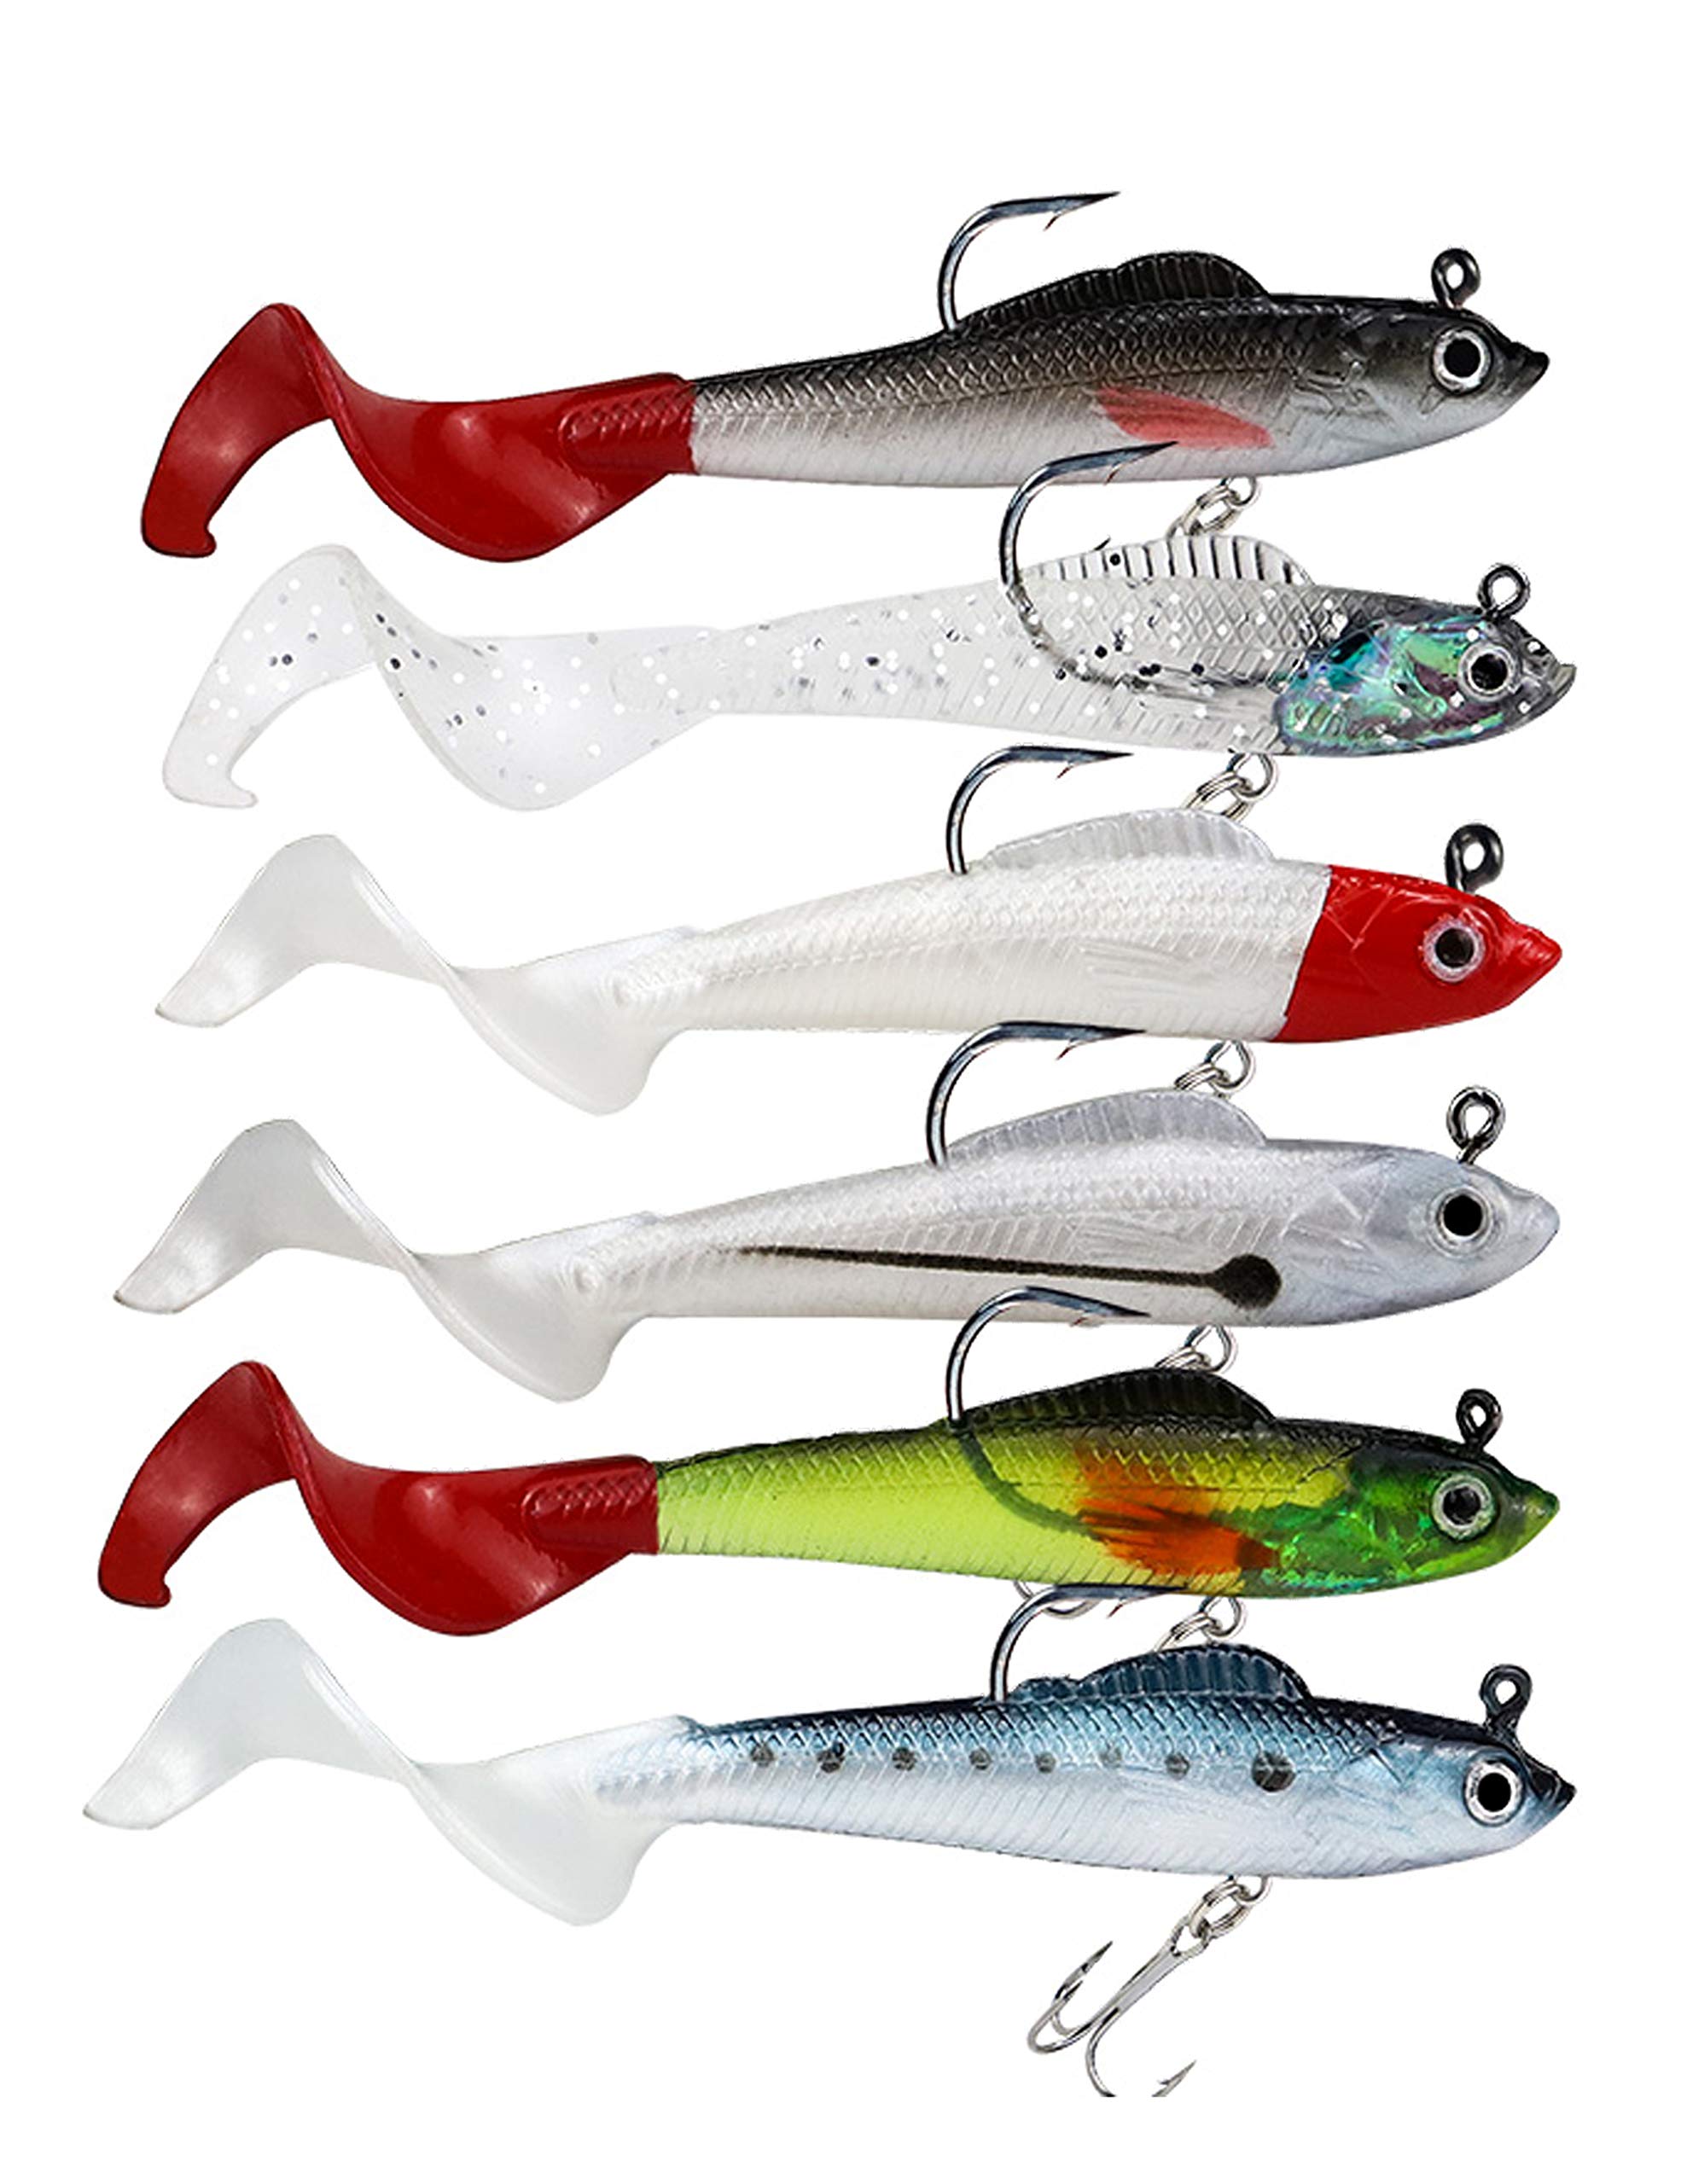 Fishing Jig Swim Shad Lures, 6Pcs Soft Fishing Lures Swim Baits with Sharp  Hook for Bass Swimbaits with Tail for Saltwater Freshwaterer Trout Pike